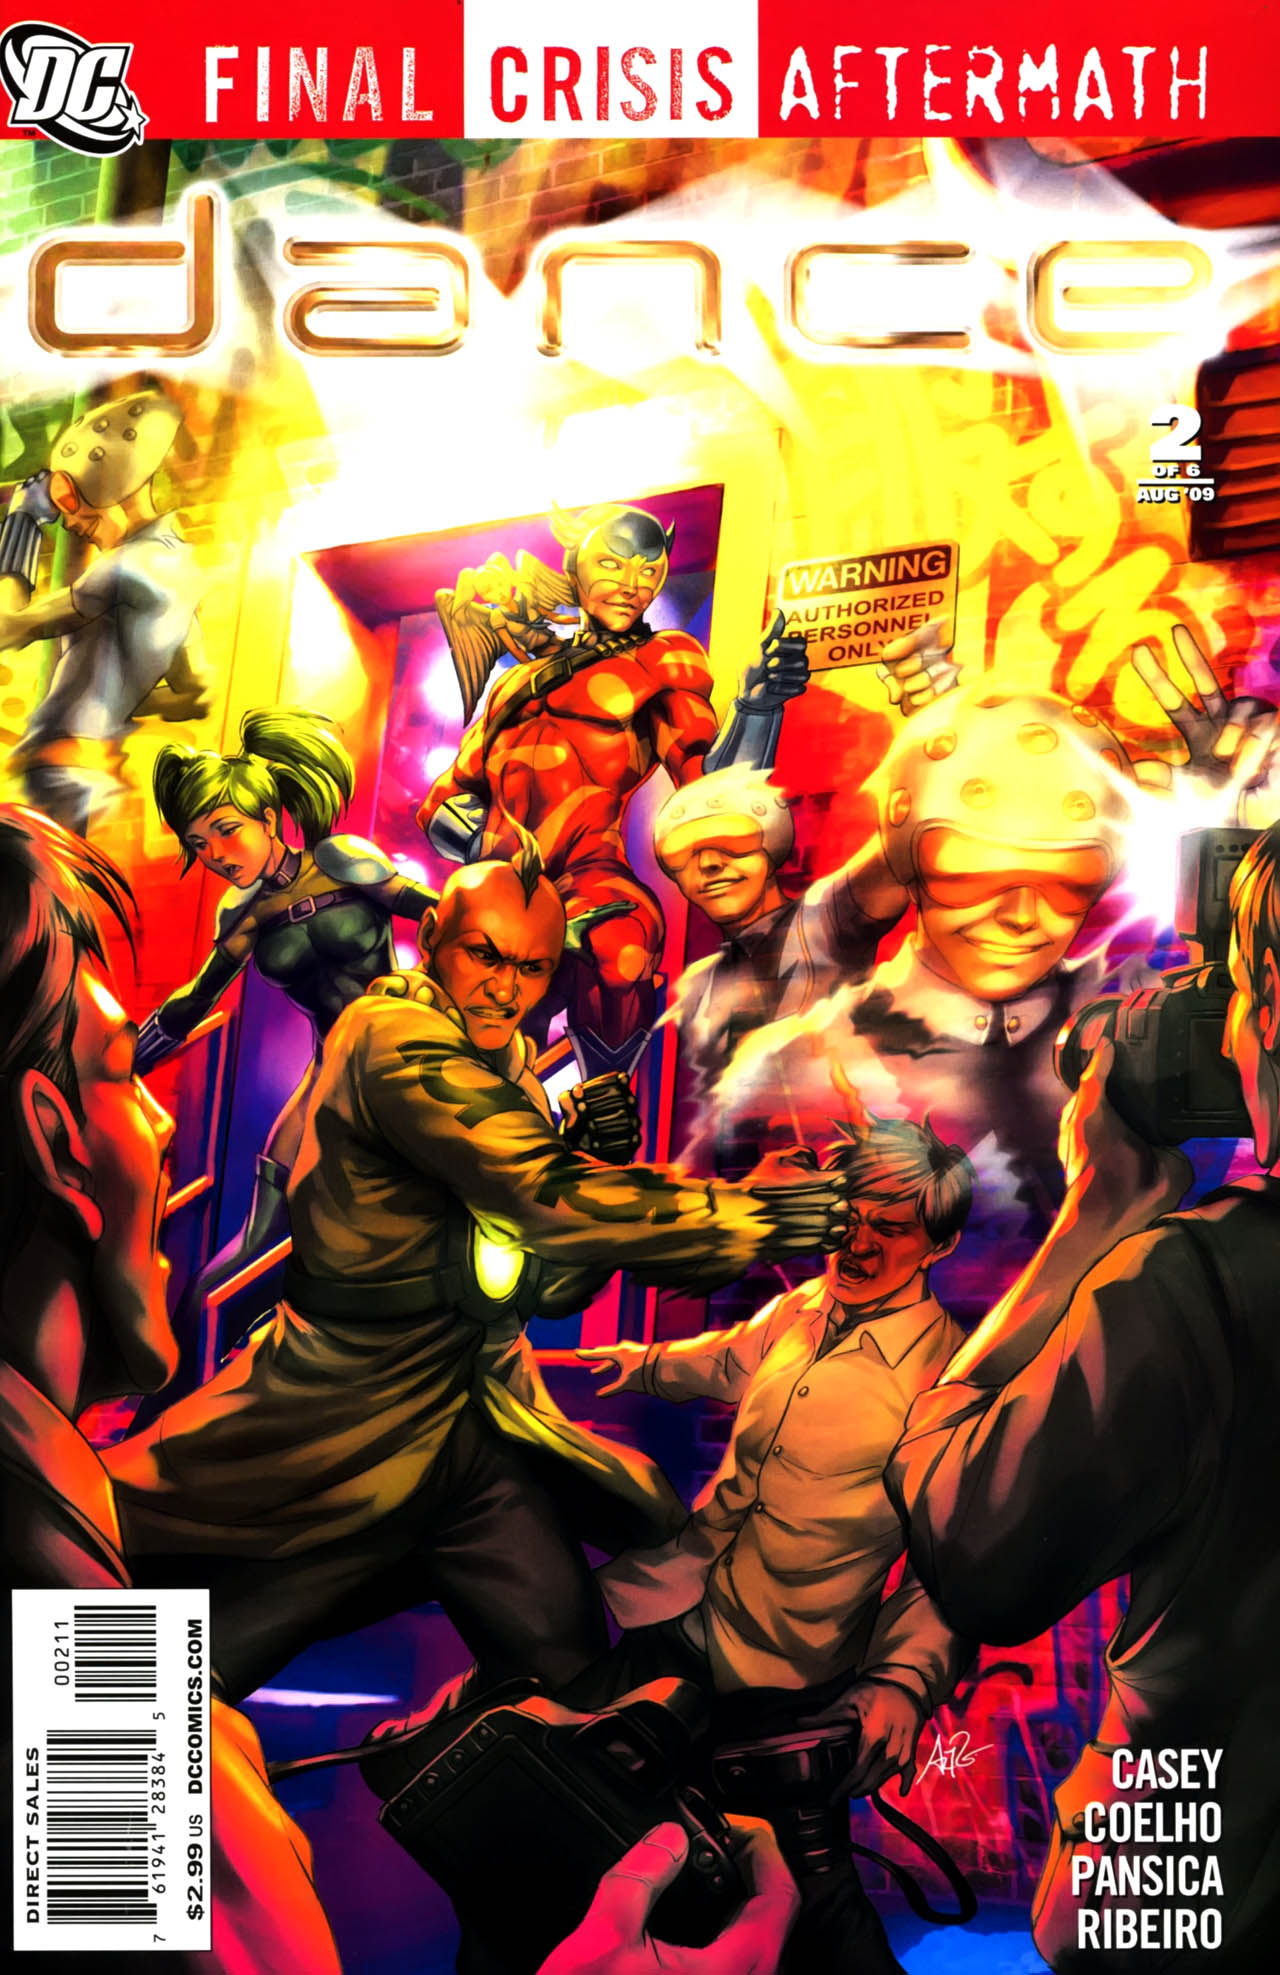 Final Crisis Aftermath: Dance Issue #2 #2 - English 1